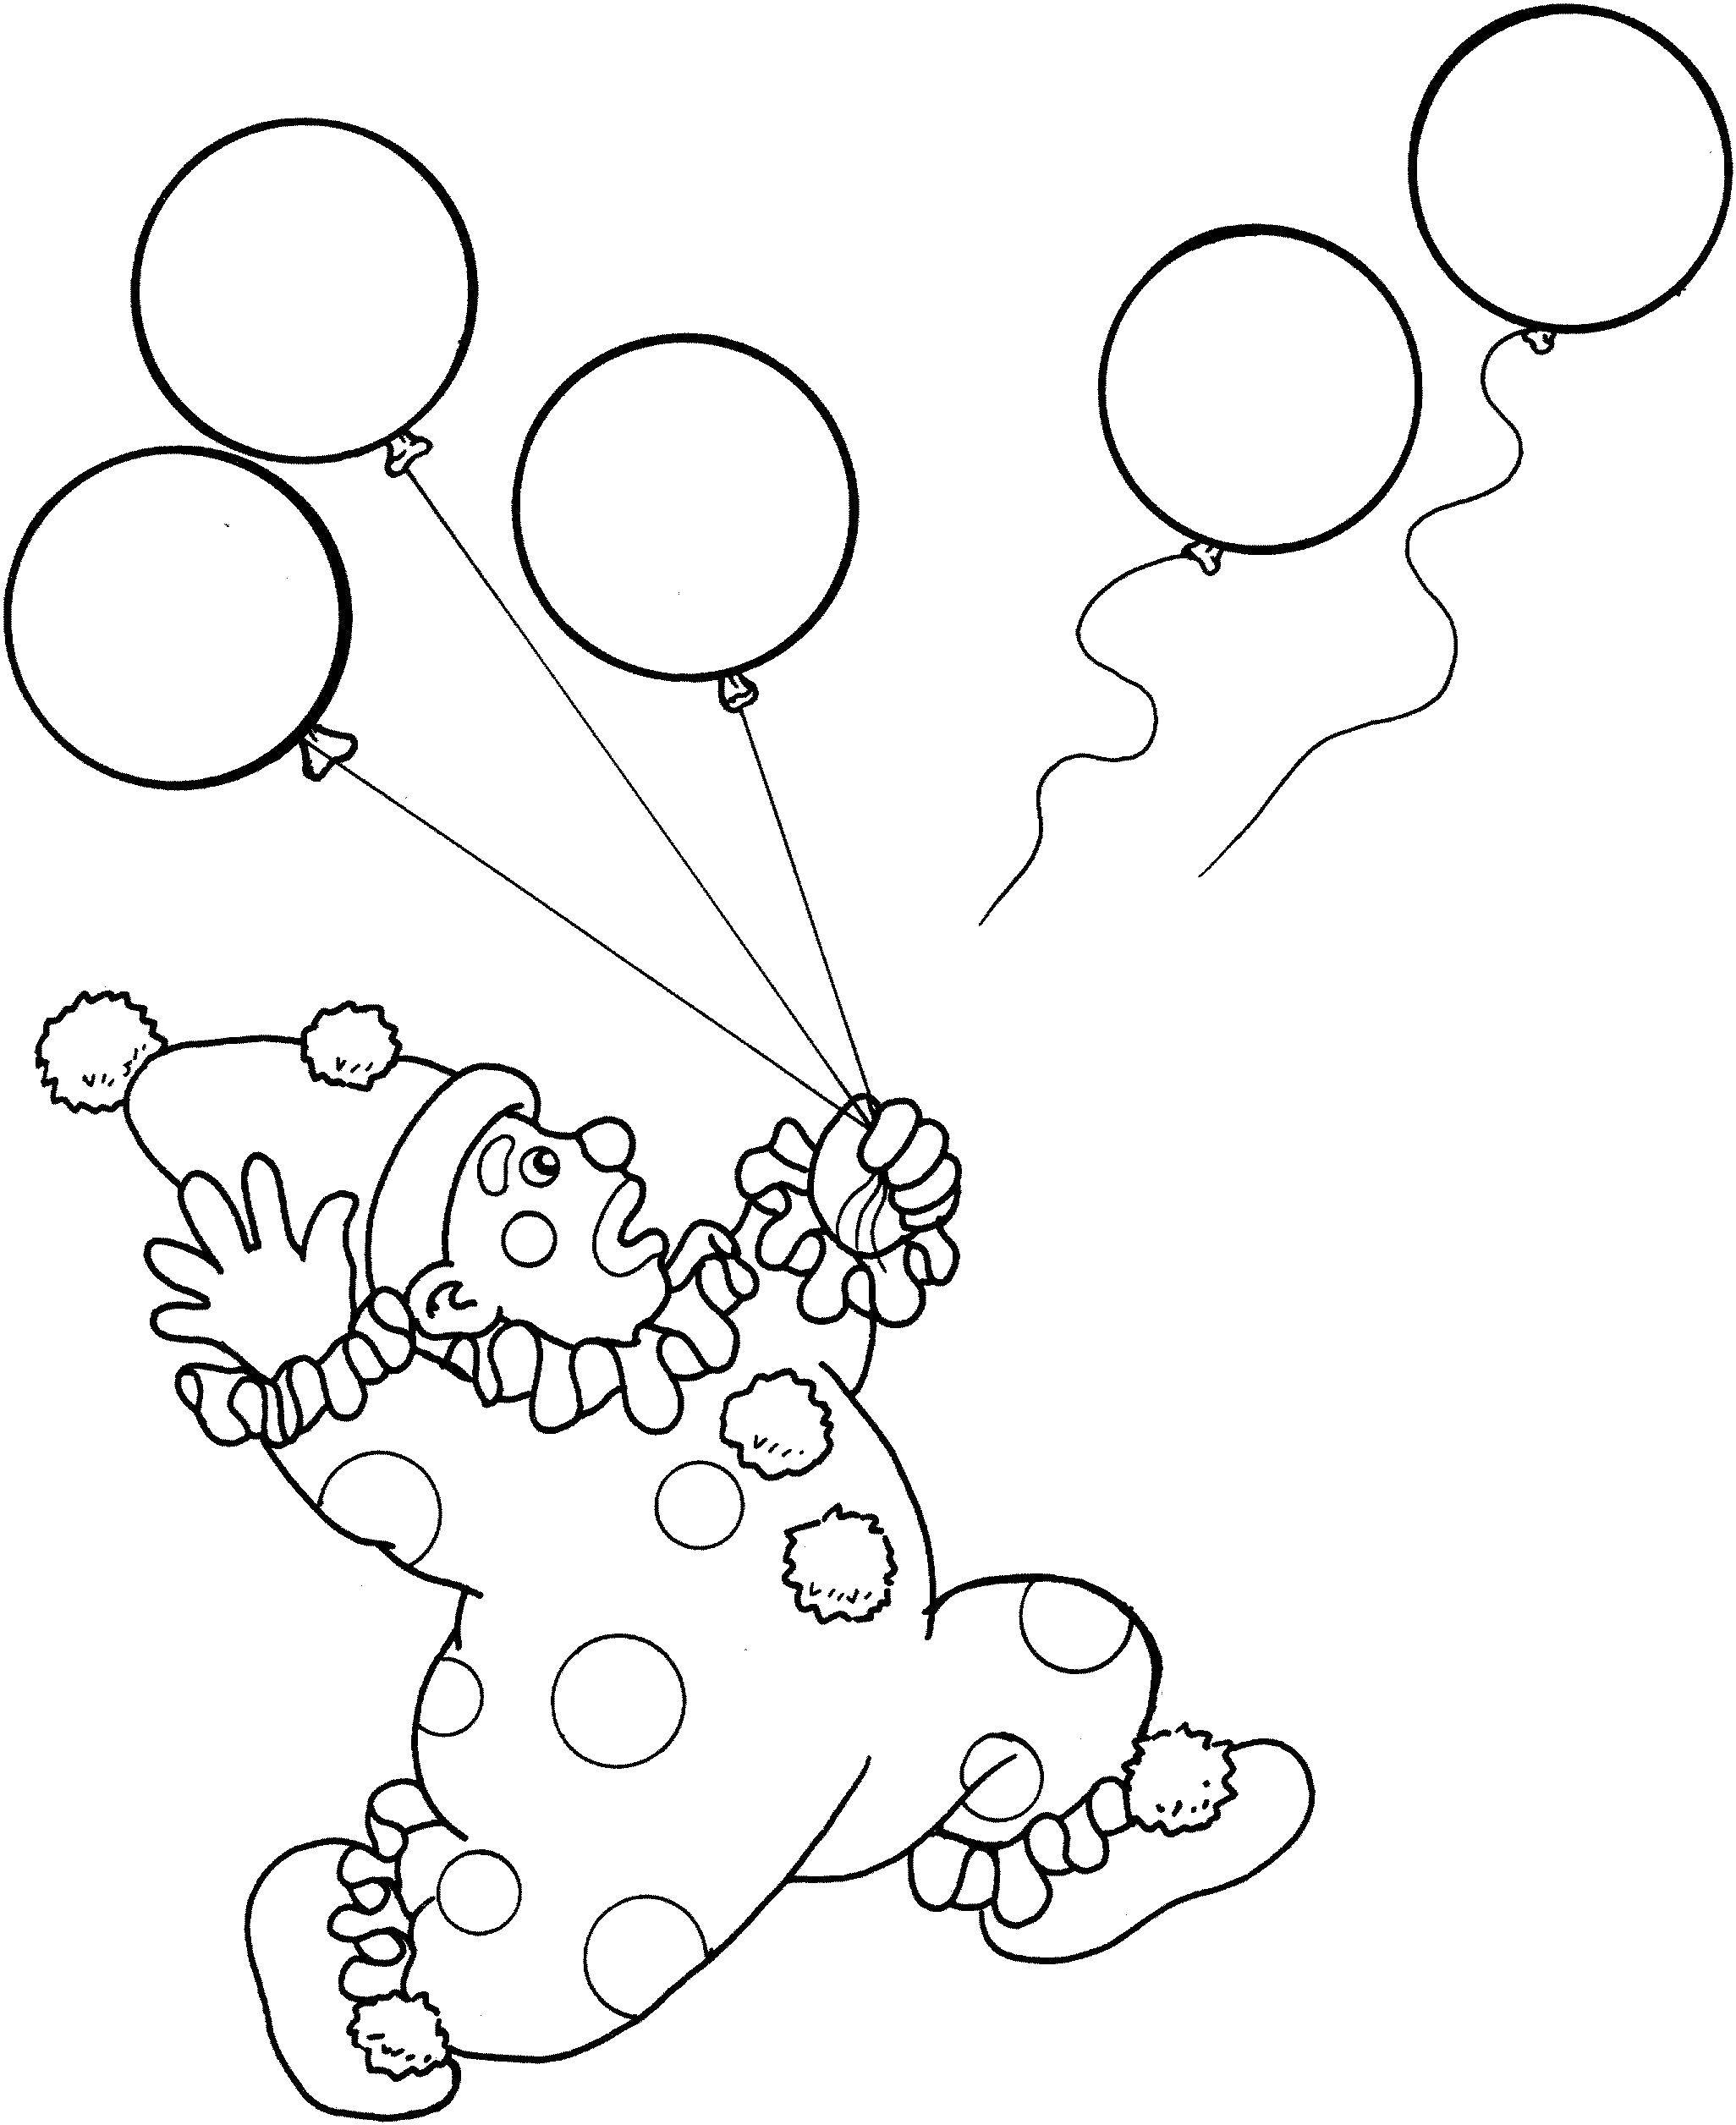 Coloring Clown and balloons. Category Clowns. Tags:  clowns, balloons.